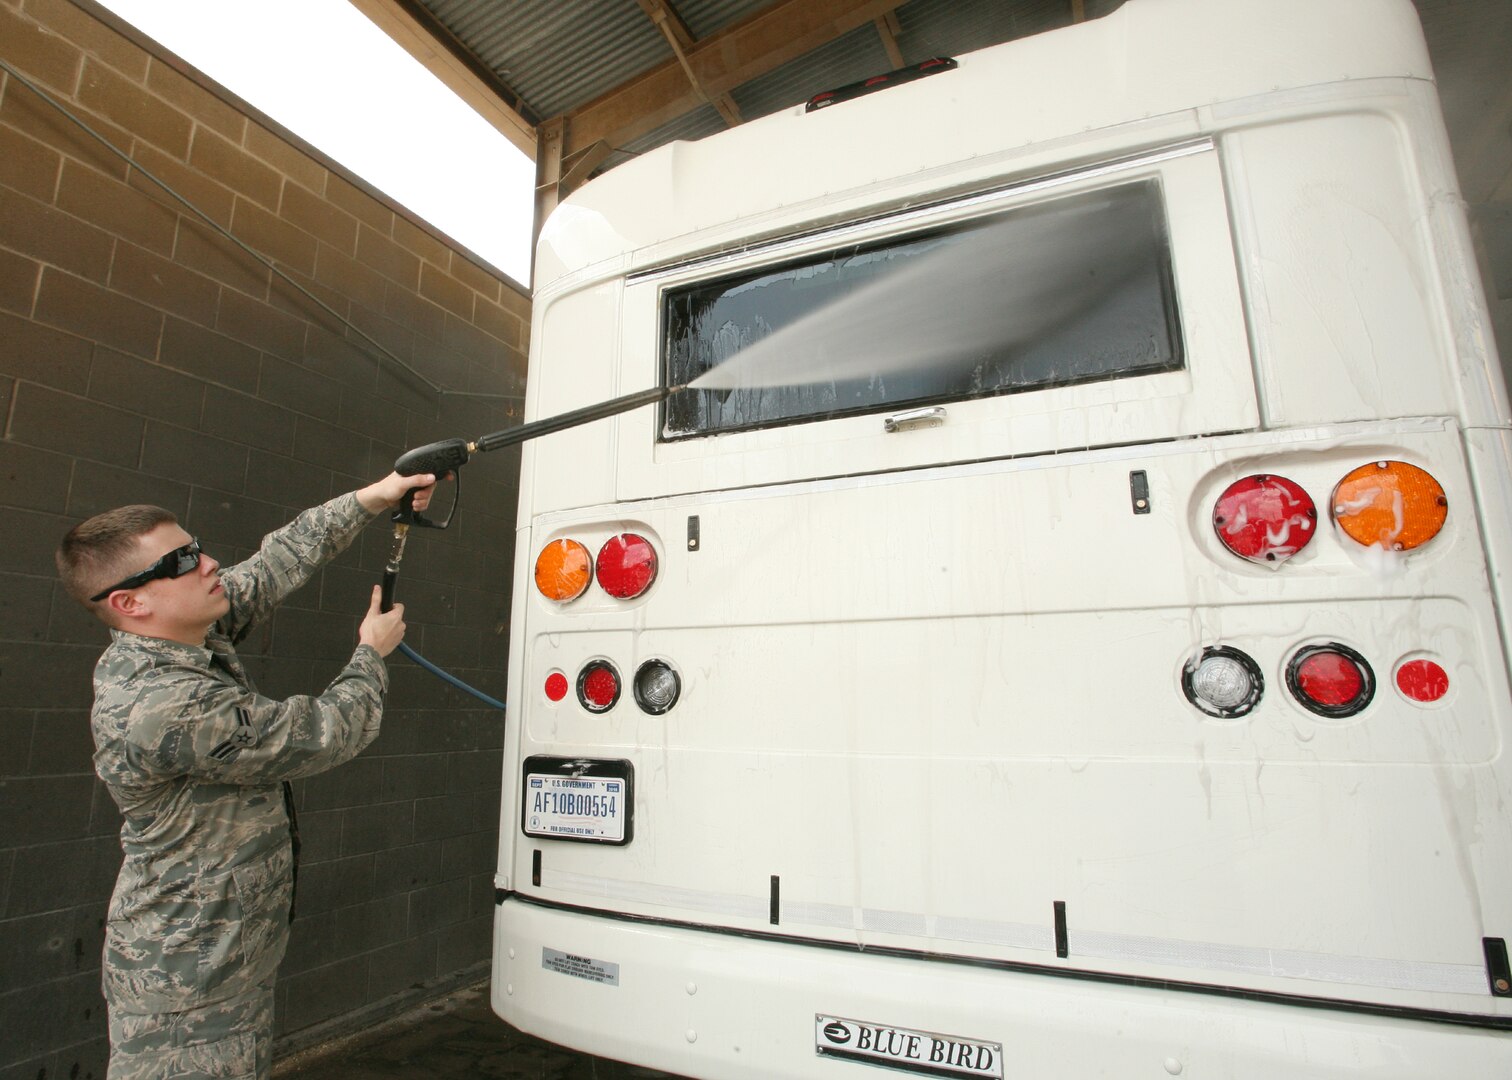 Airman 1st Class Adam Vargeson, 802nd Logistics Readiness Squadron, washes the back window of a bus at the Lackland vehicle maintenance yard April 20. The yard is equipped with a newly installed water recycling machine that will save one million gallons of water a year. (U.S. Air Force photo by Robbin Cresswell)